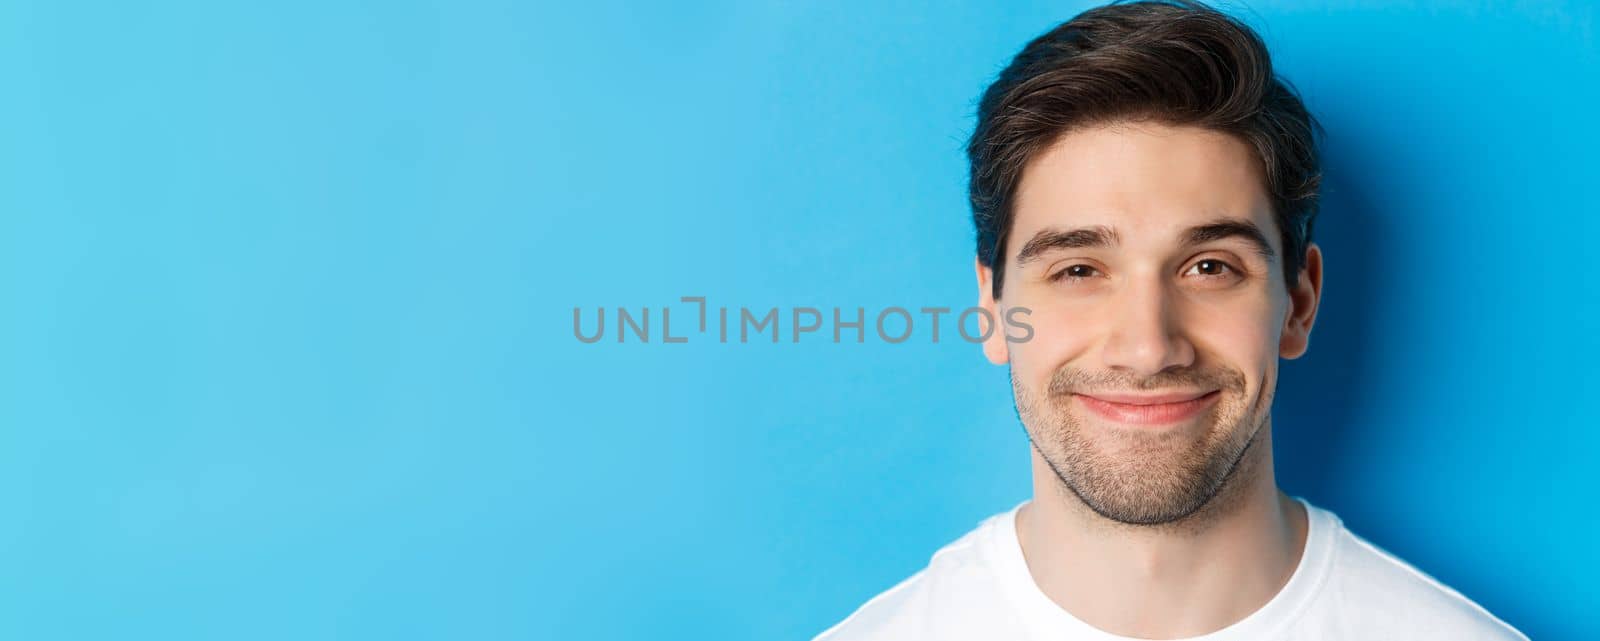 Headshot of attractive man smiling pleased, looking intrigued, standing over blue background.